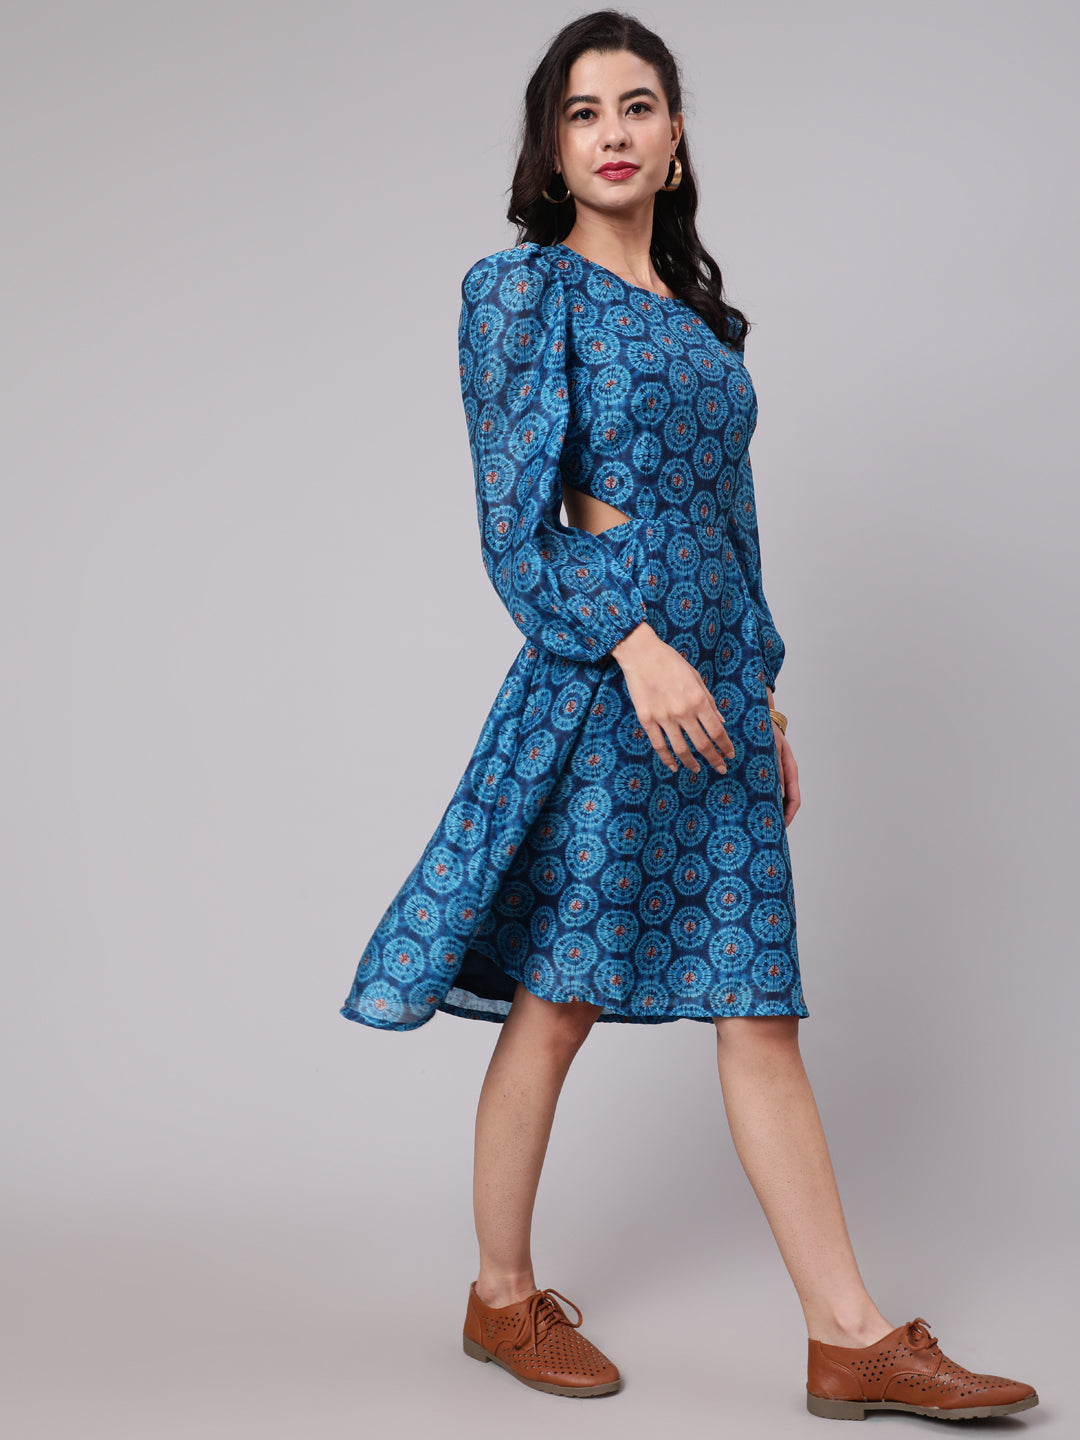 Mother Daughter Combo-Blue Printed Cut-Out Skater Dress